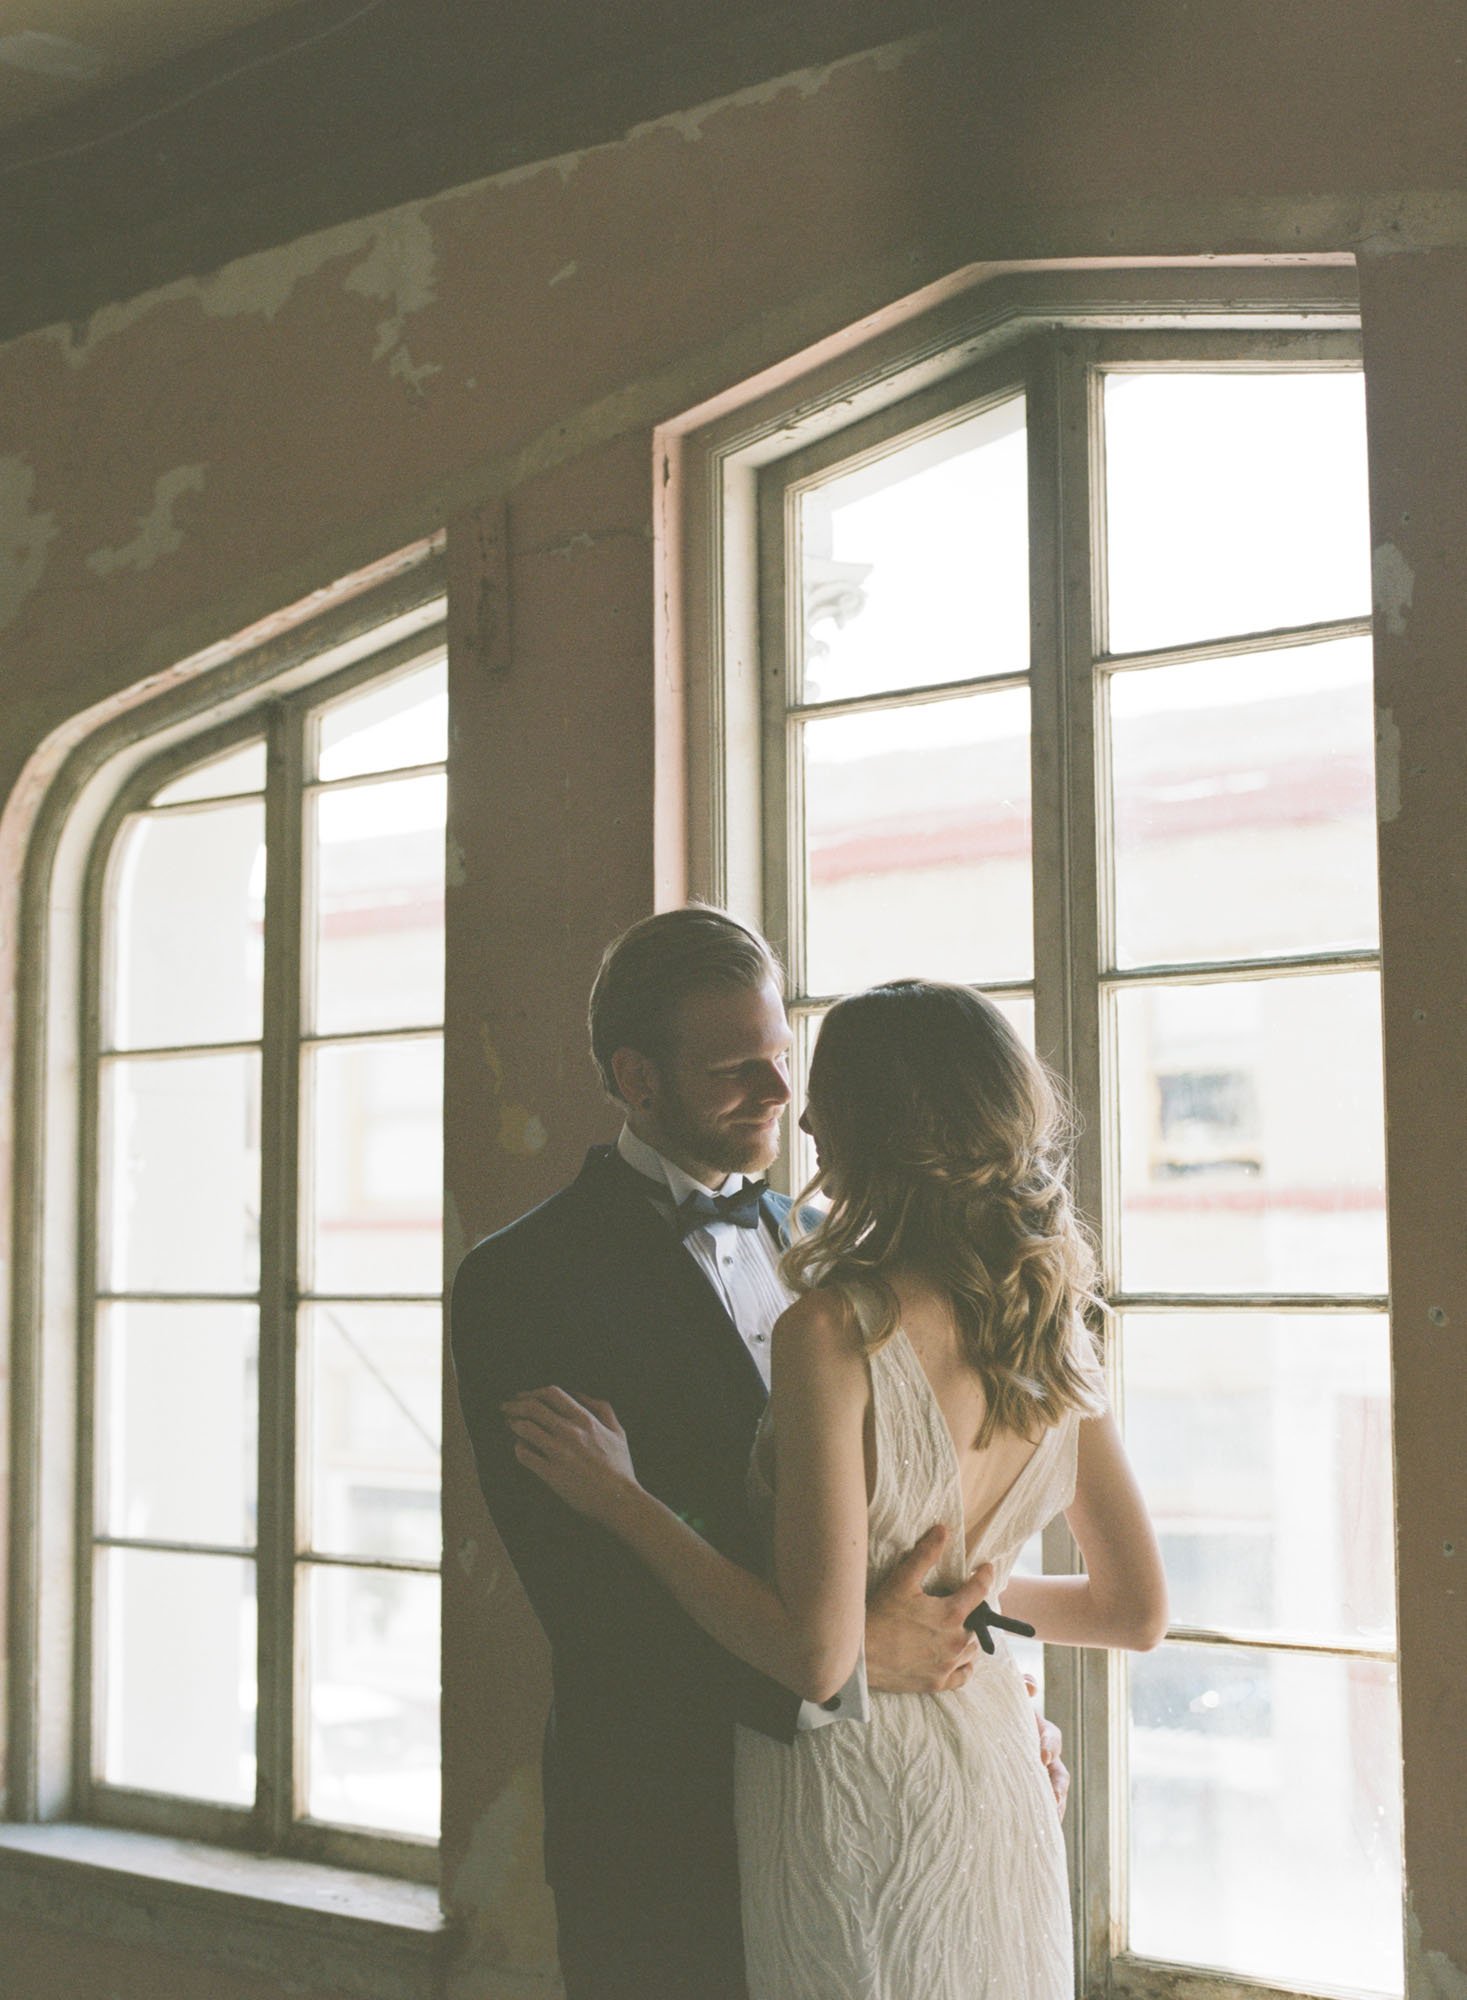  Photograph of a bride and groom embracing standing in front of a large bay window. The bride is wearing Made With Love Ryder and the groom is wearing a black Tuxedo.  